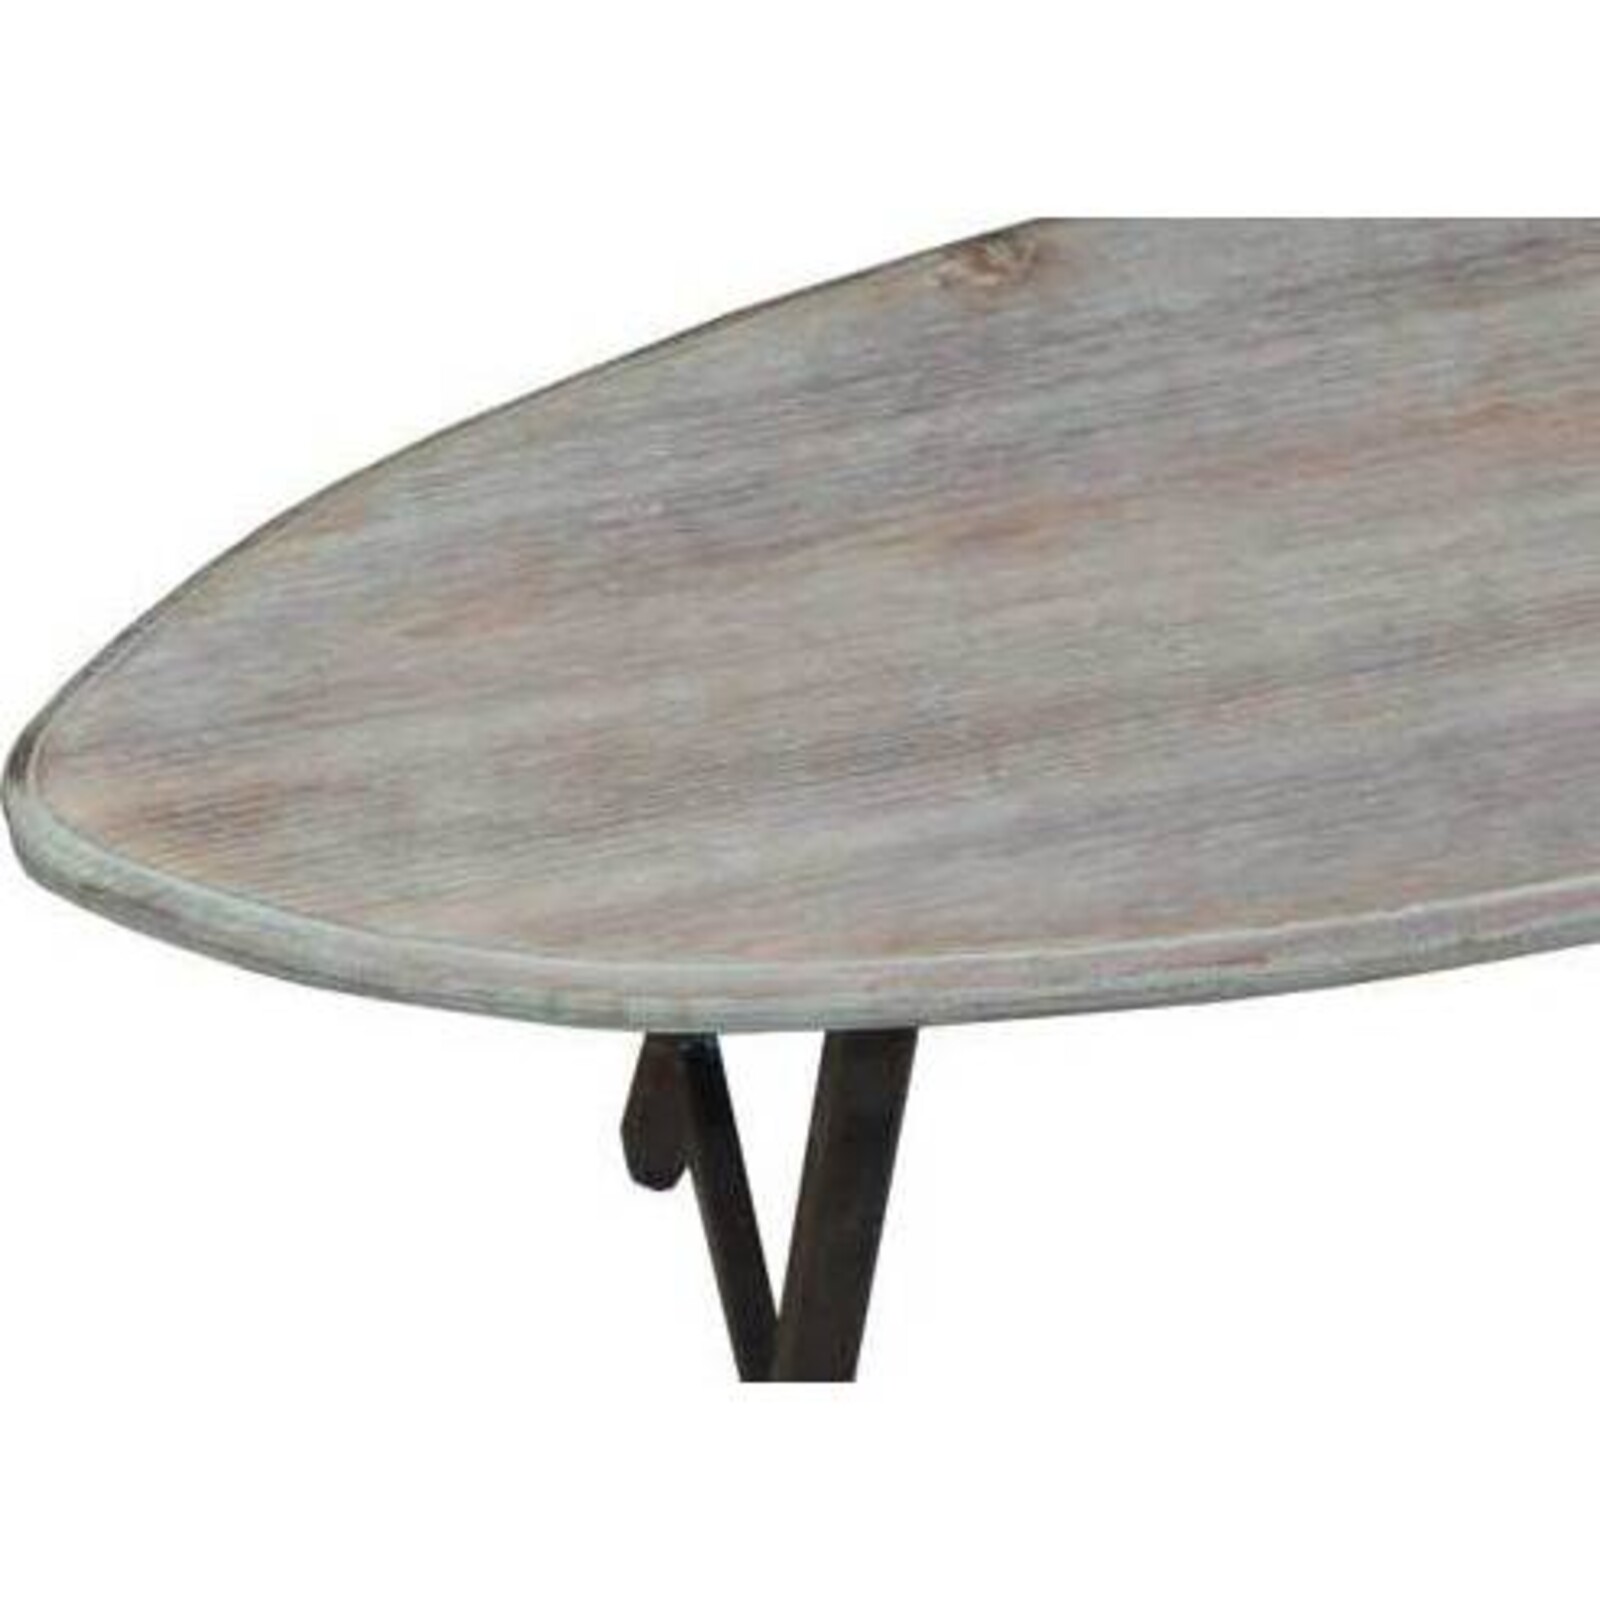 Nest of Tables Surfboard S/3